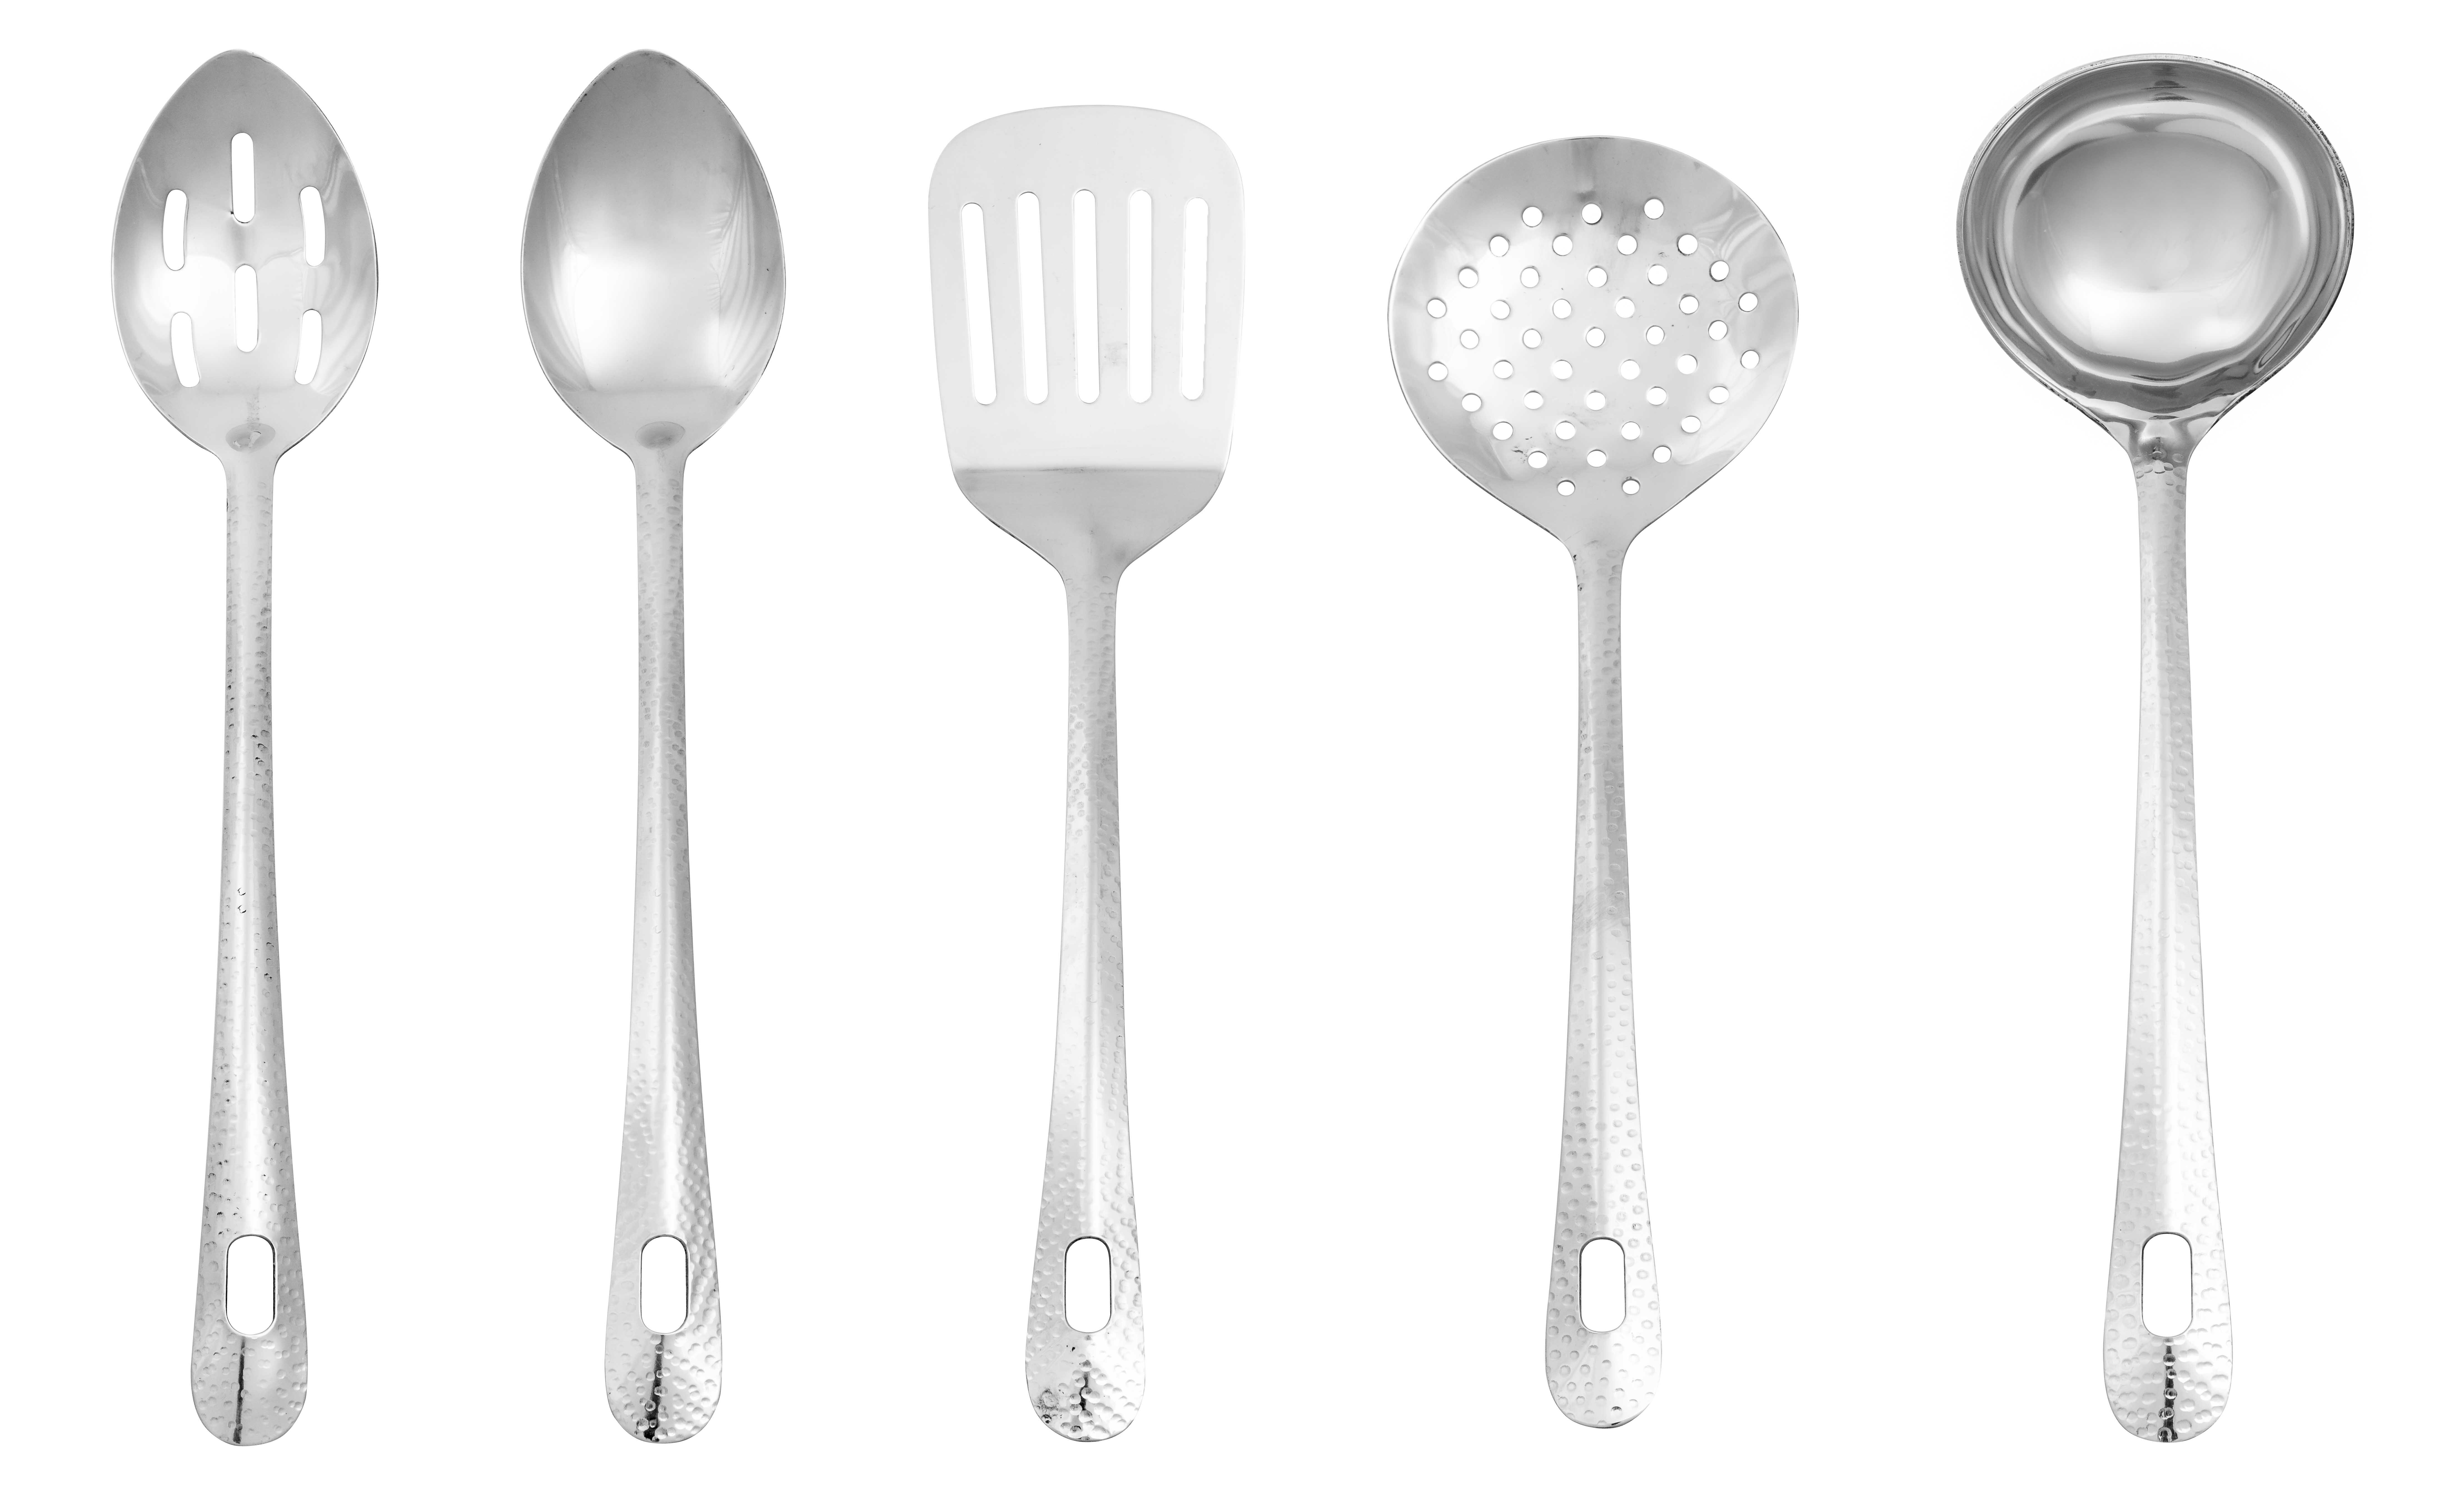 OXO 15-Piece Stainless Steel Kitchen Utensils Set + Reviews